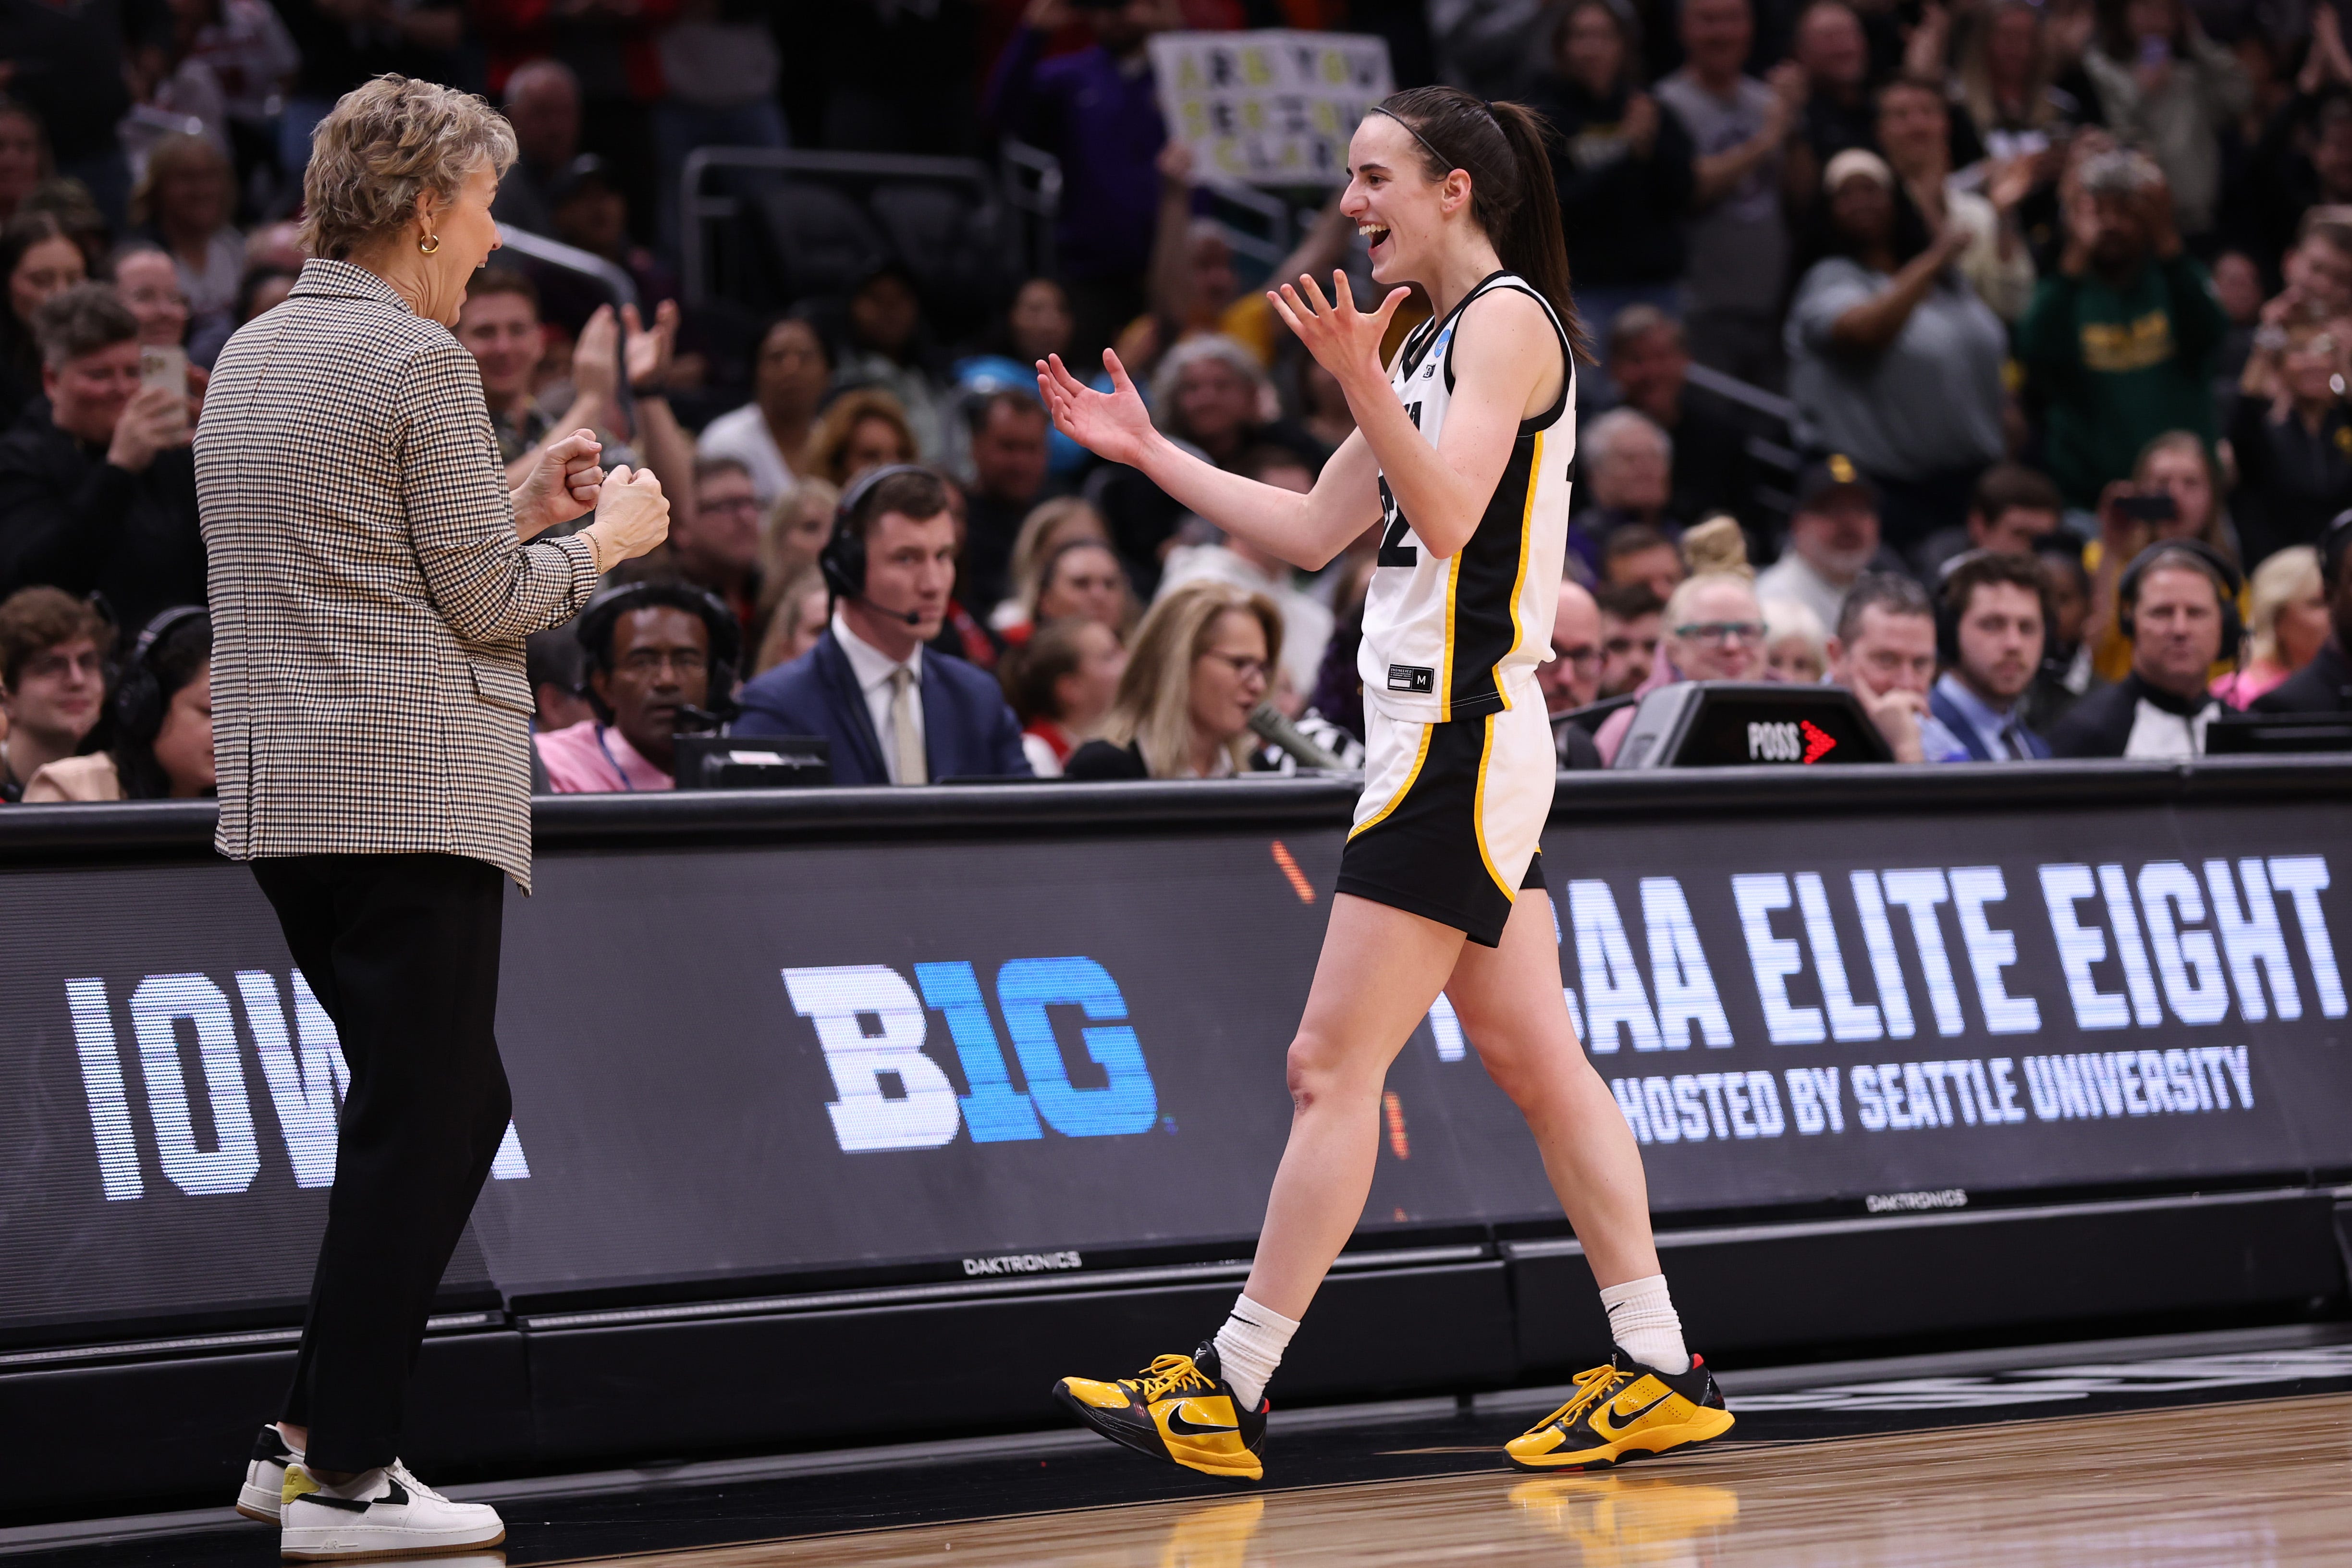 Iowa head coach Lisa Bluder, left, embraces Caitlin Clark as they celebrate after defeating the Louisville Cardinals in the Elite Eight round of the NCAA Women's Basketball Tournament, March 26, 2023, at Climate Pledge Arena in Seattle.